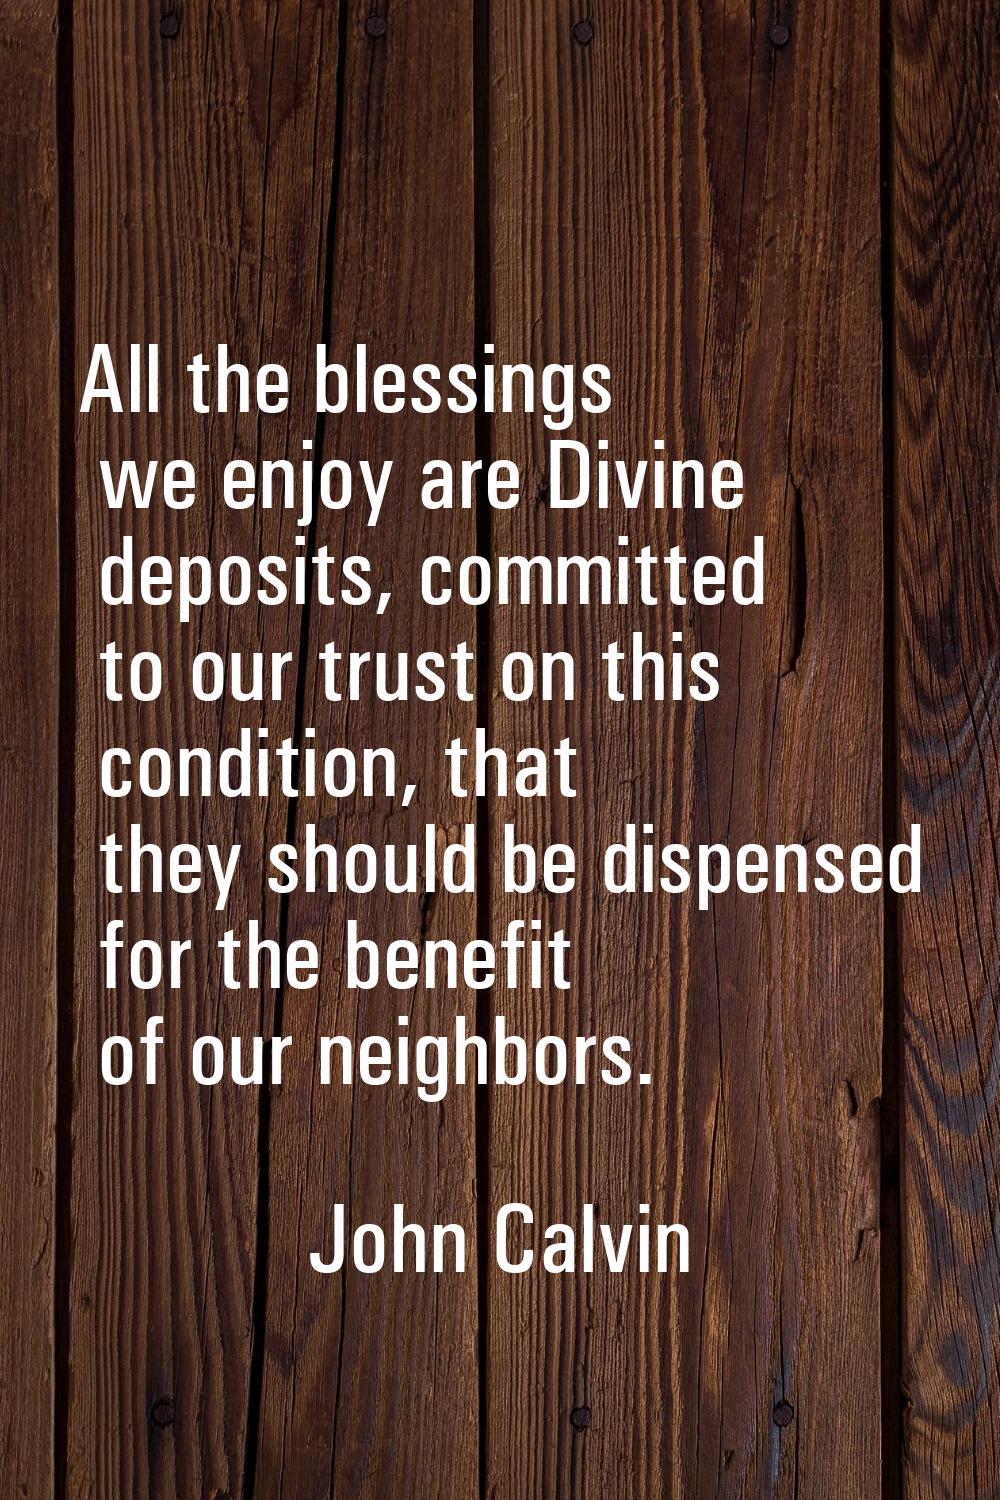 All the blessings we enjoy are Divine deposits, committed to our trust on this condition, that they